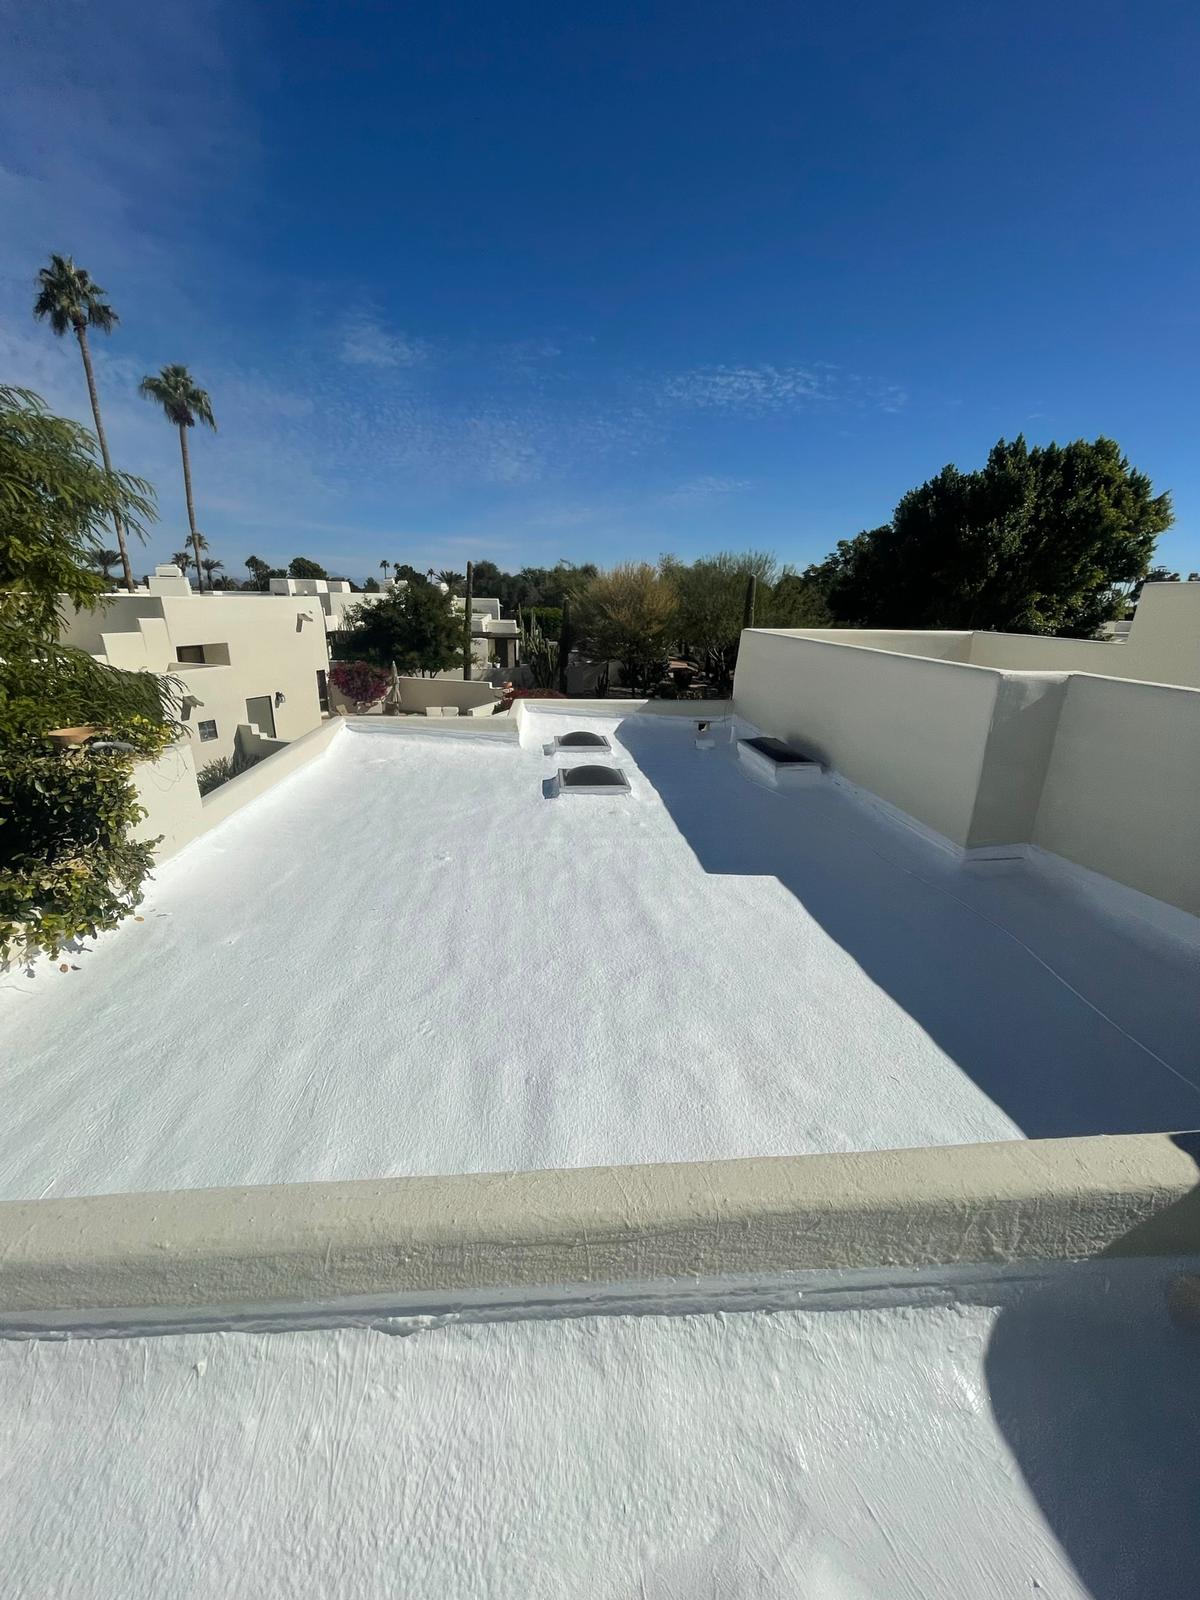 are roof coatings any good? Behmer Roofing foam spray